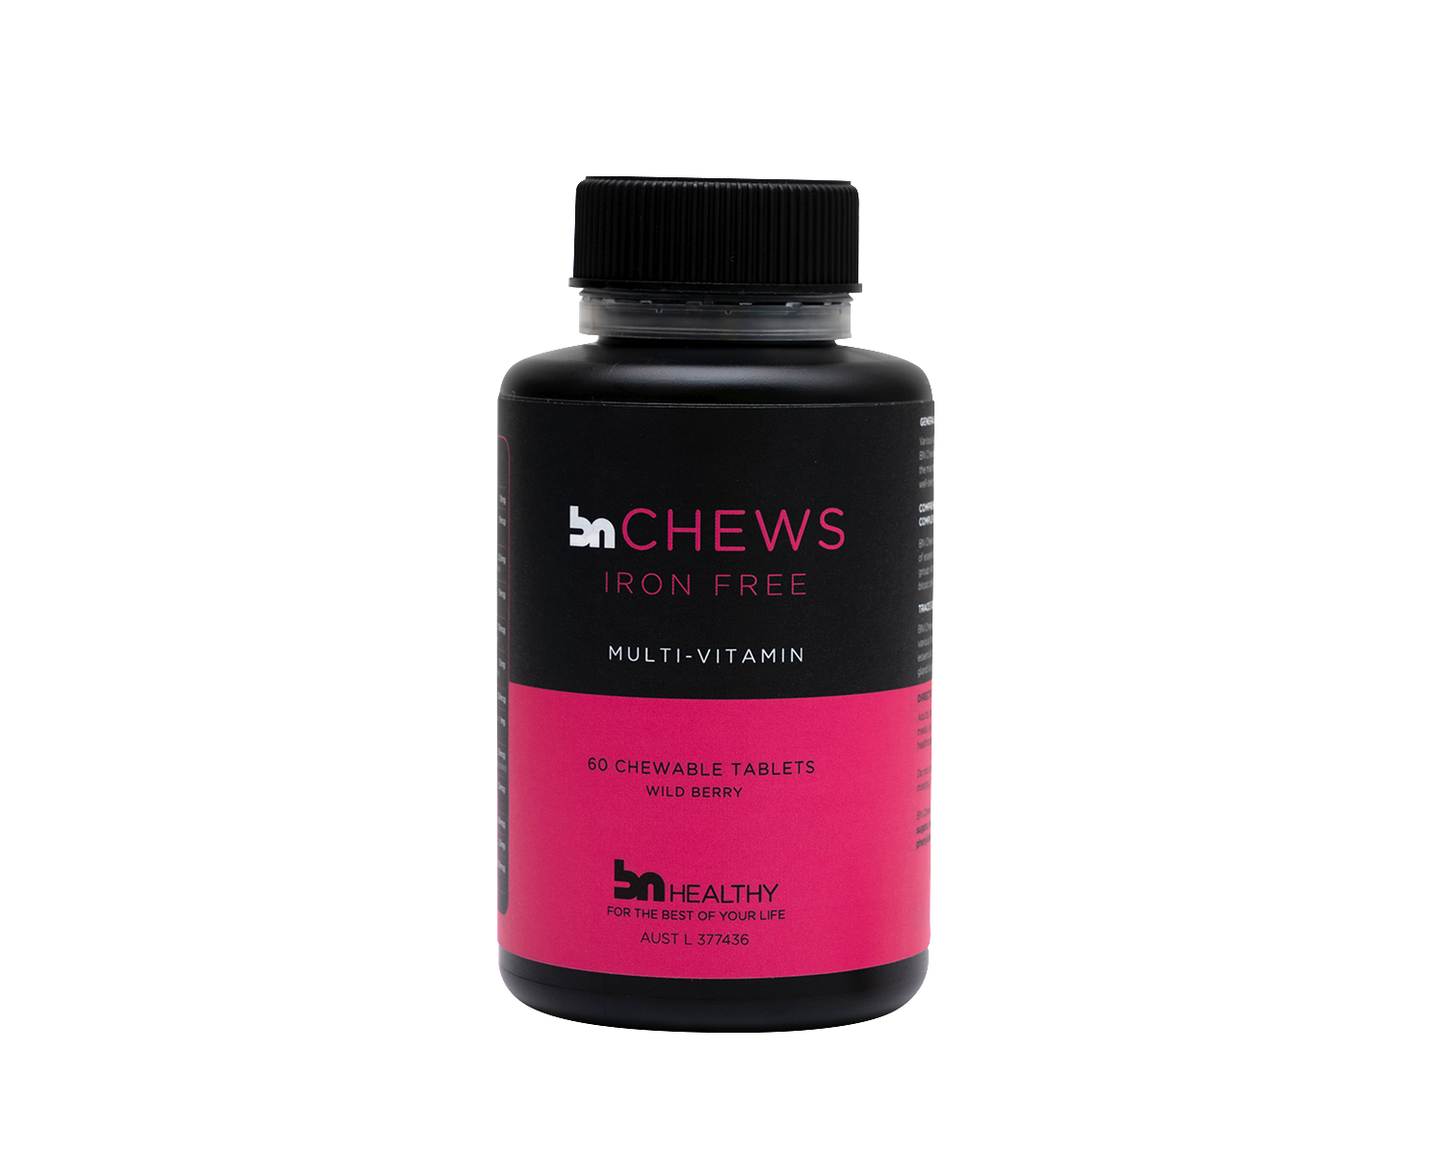 BN Chews Iron-Free - Chewable Multivitamins - 6 Month Subscription - Save 25%